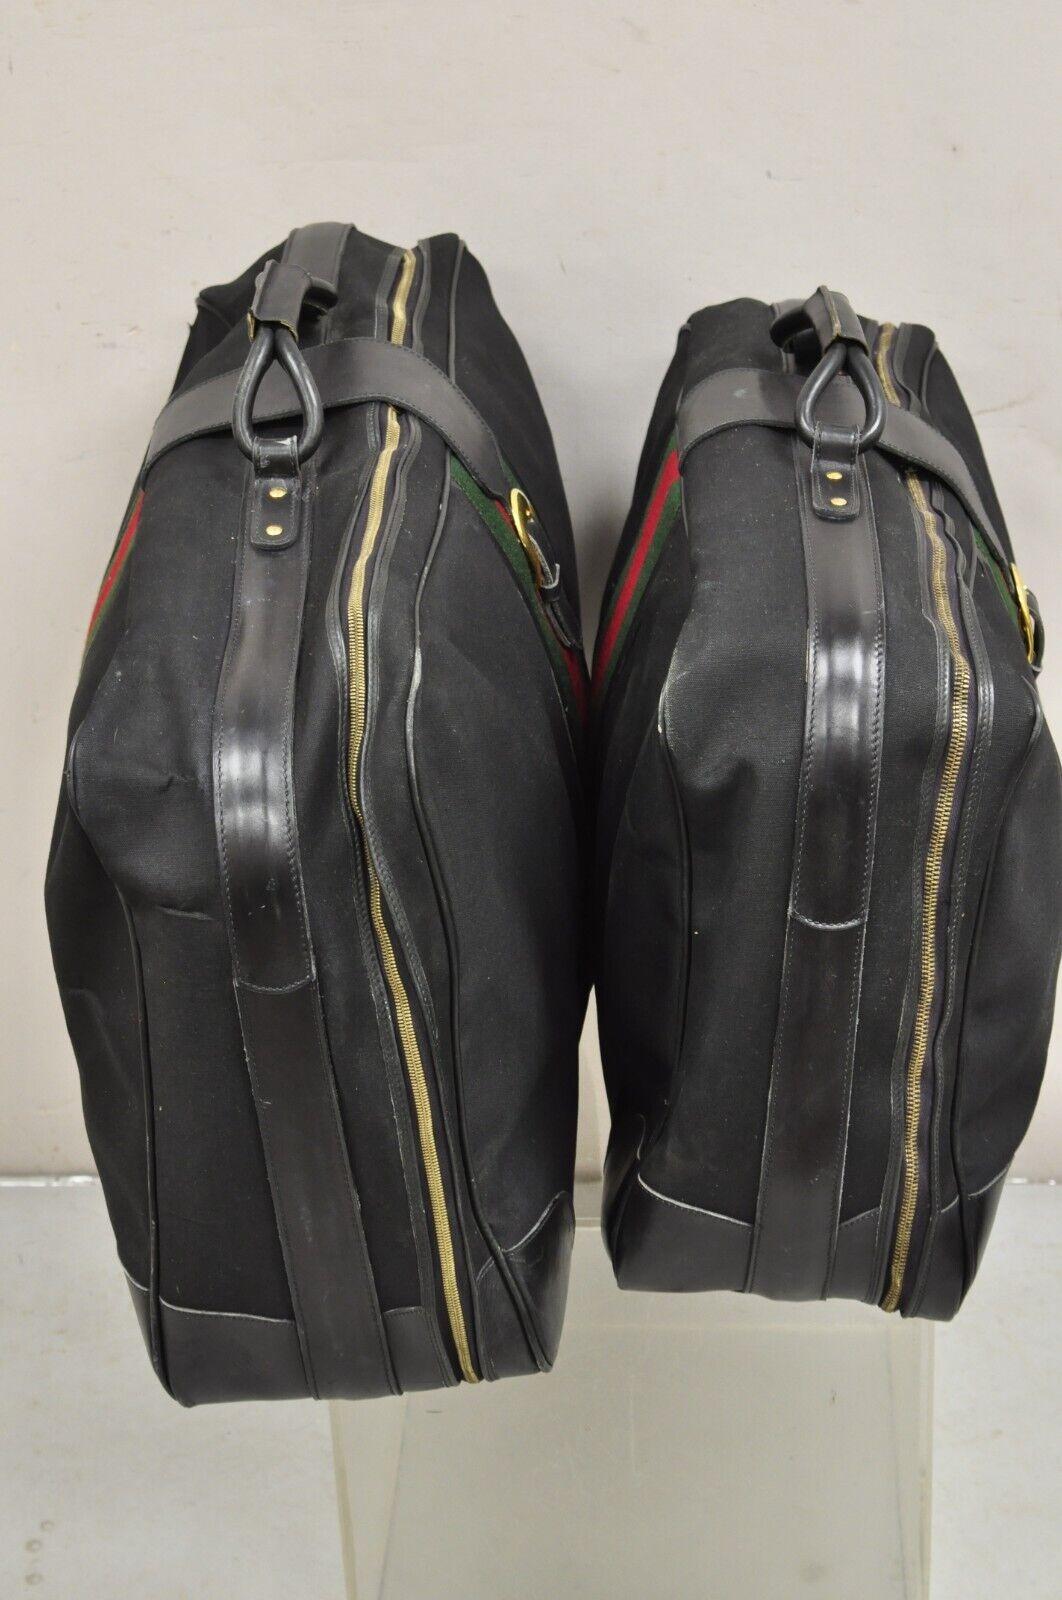 Vintage Gucci Black Canvas & Leather Suitcase Luggage His and Hers Set -2 Pc (B) For Sale 6